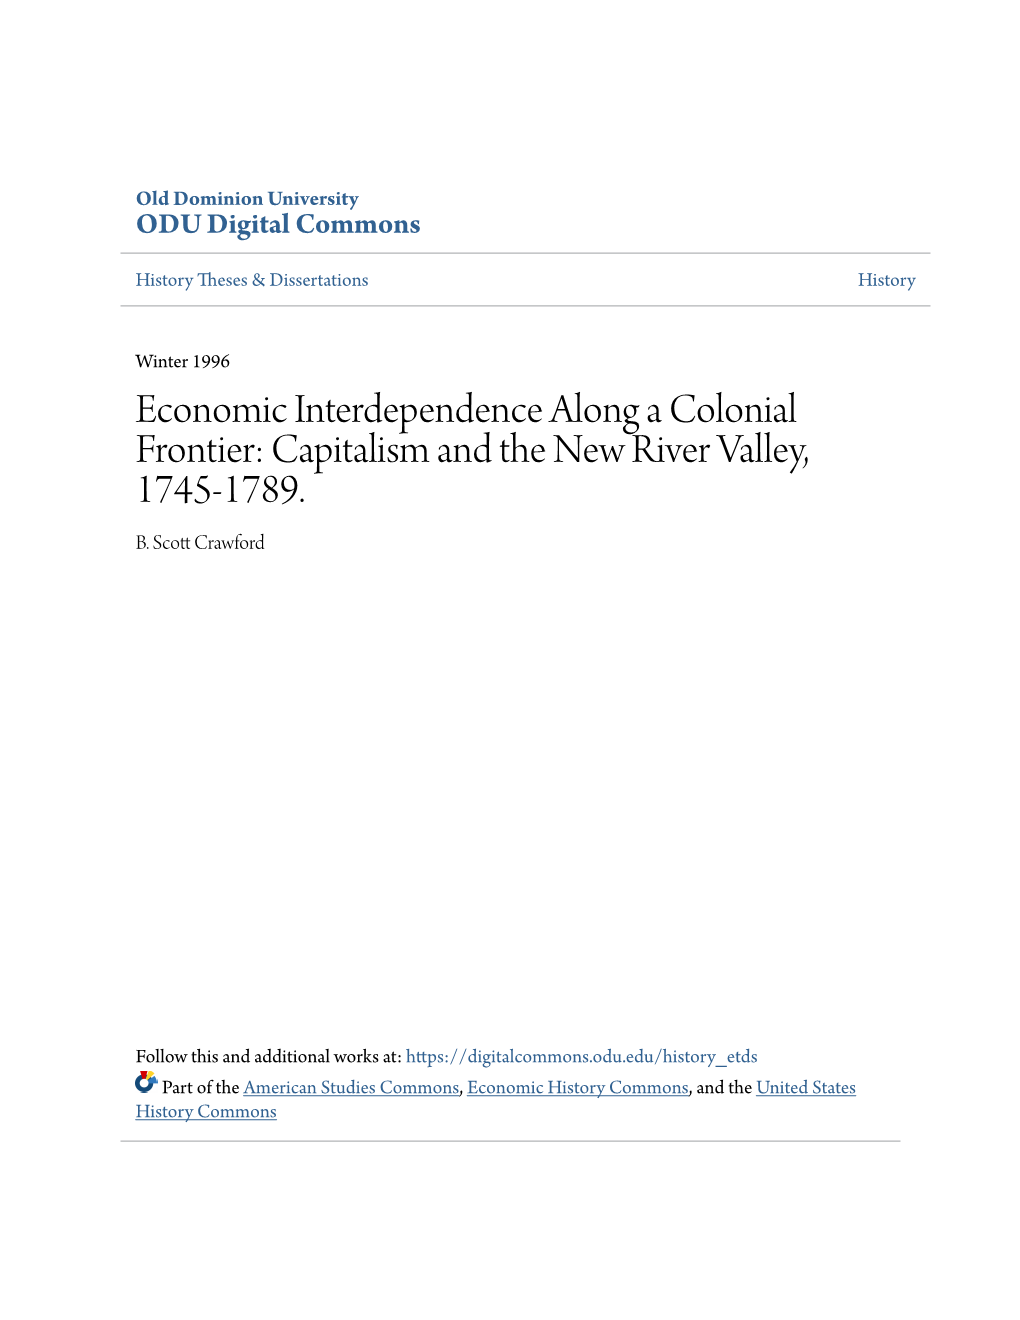 Capitalism and the New River Valley, 1745-1789. B